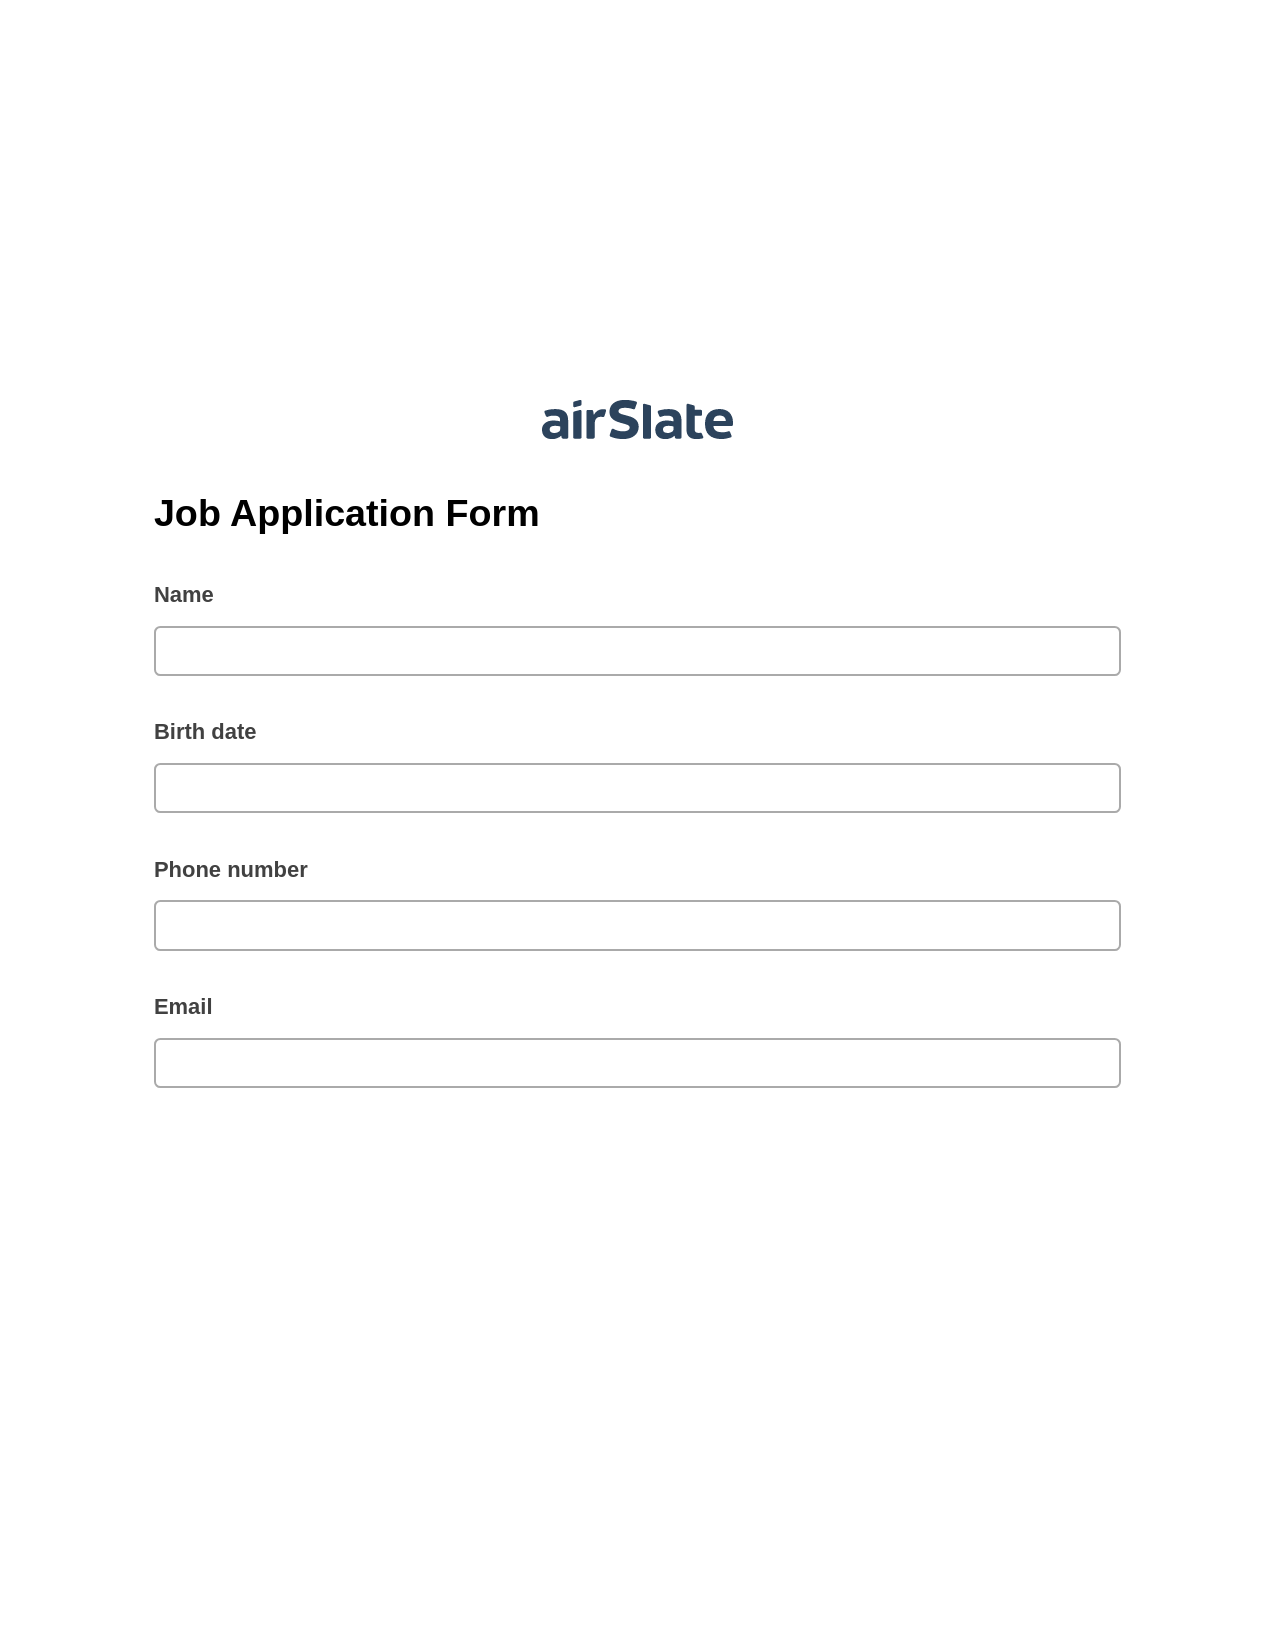 Job Application Form Pre-fill Dropdown from Airtable, SendGrid send Campaign bot, Export to Salesforce Bot